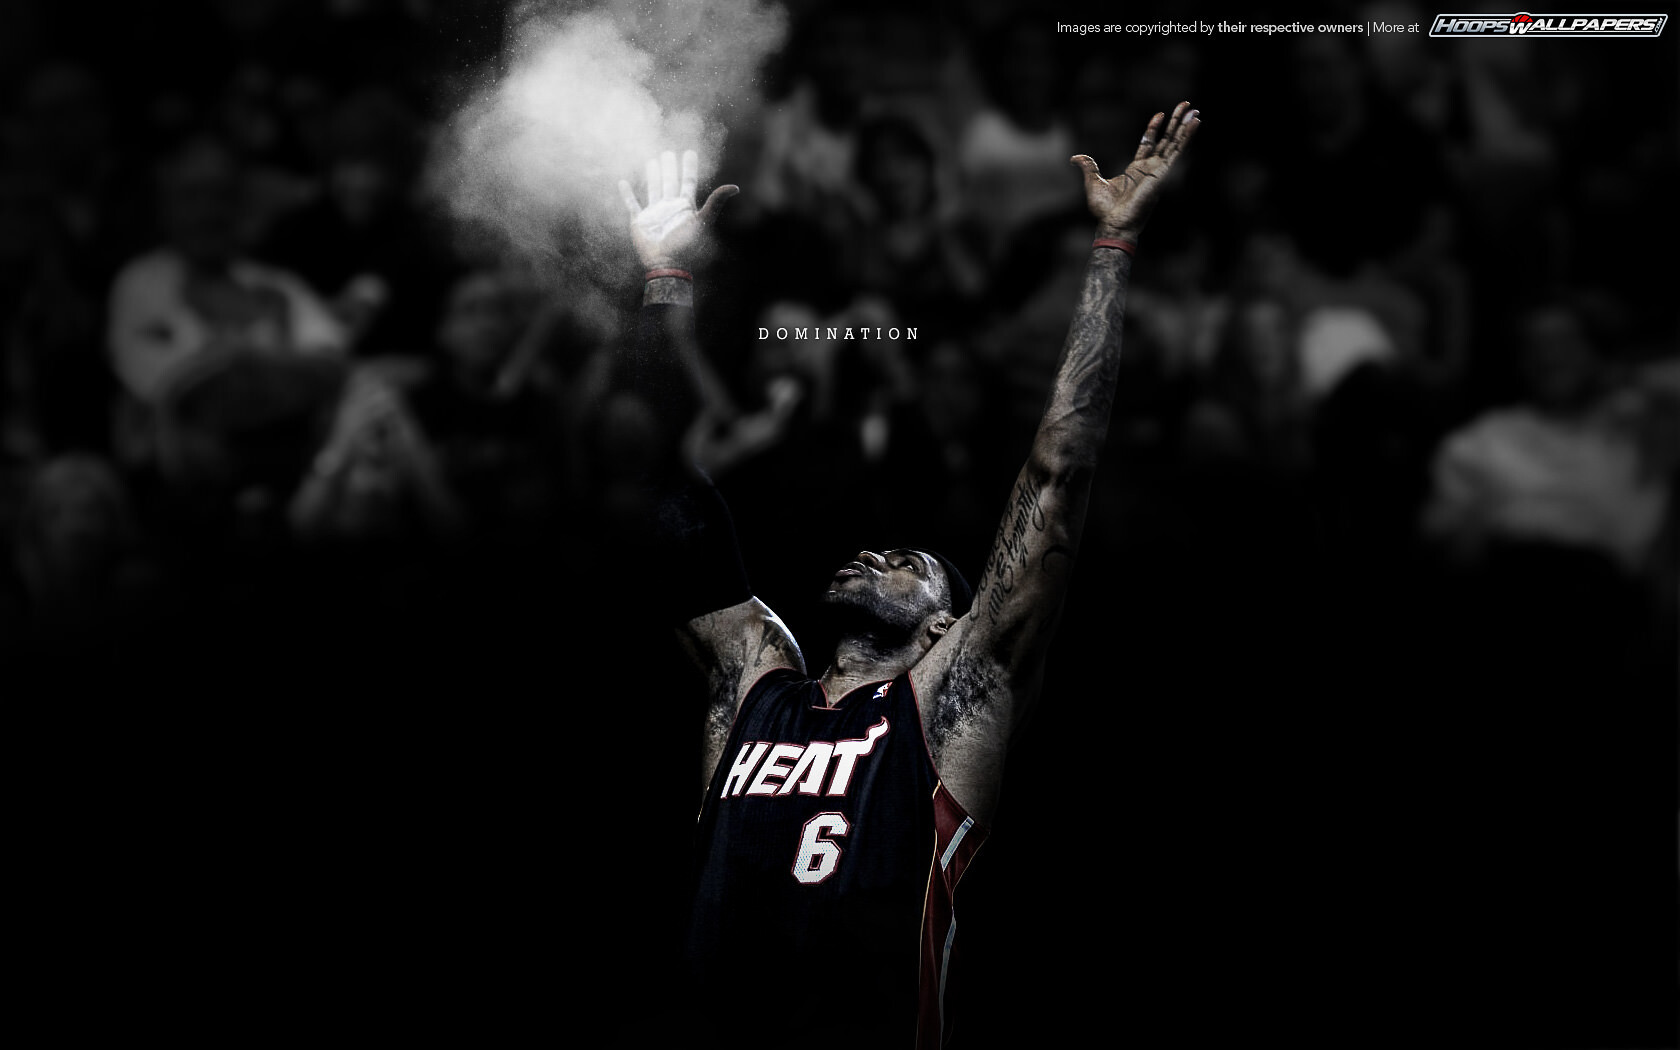 54+ LeBron James Wallpapers: HD, 4K, 5K for PC and Mobile | Download free  images for iPhone, Android